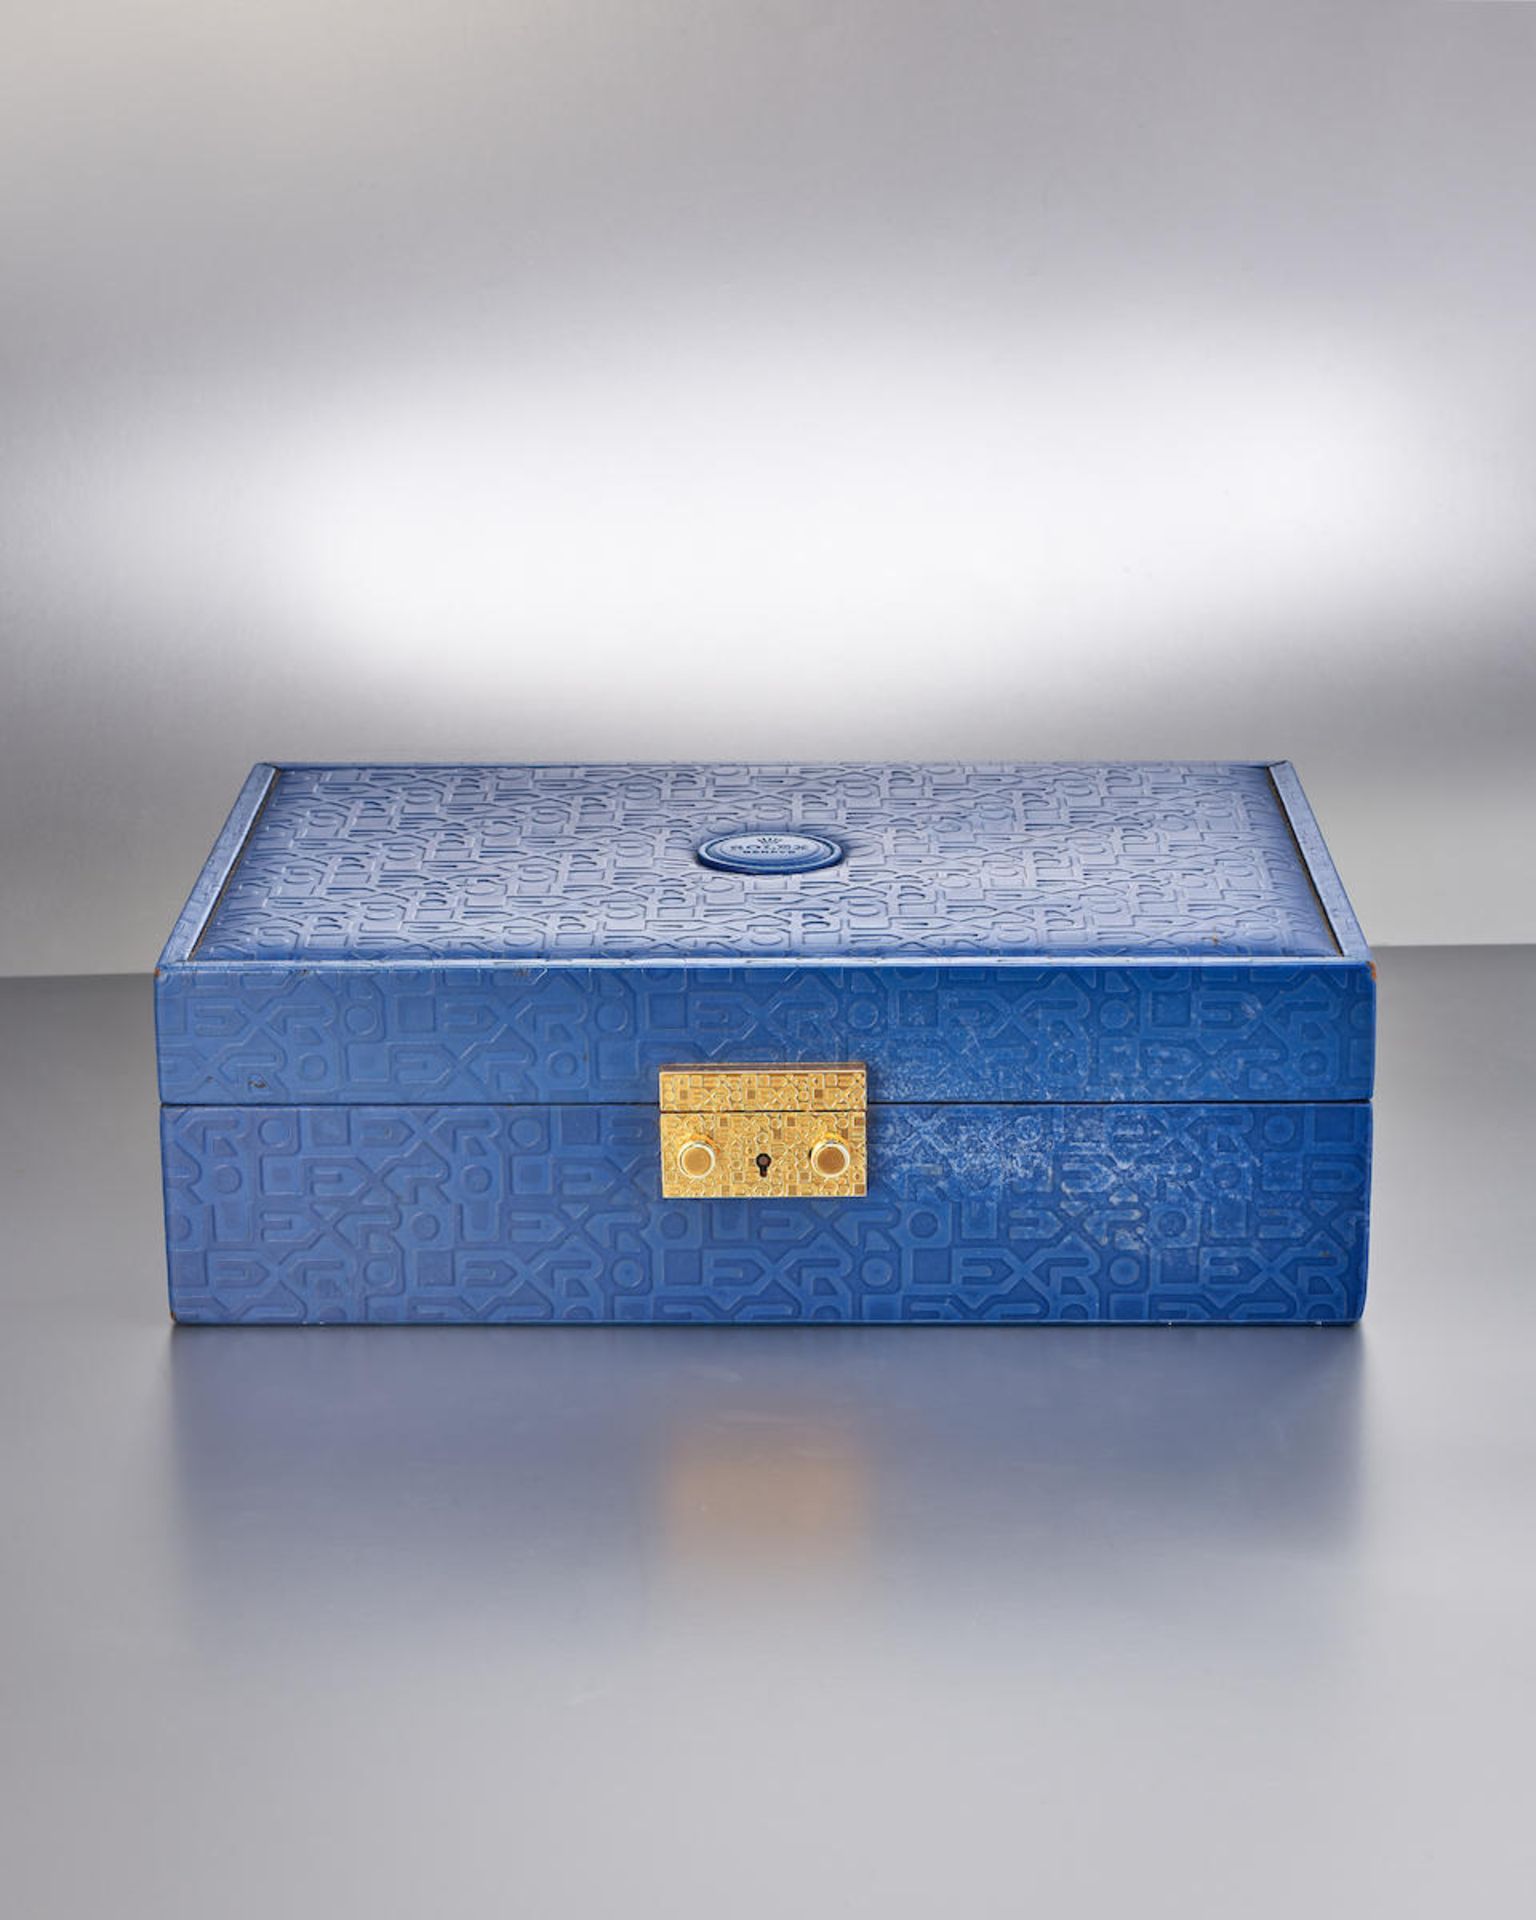 [NO RESERVE] ROLEX | A GROUP OF TWO: A LARGE BLUE LEATHERETTE WATCH AND JEWELRY BOX WITH JUBILEE... - Image 4 of 5